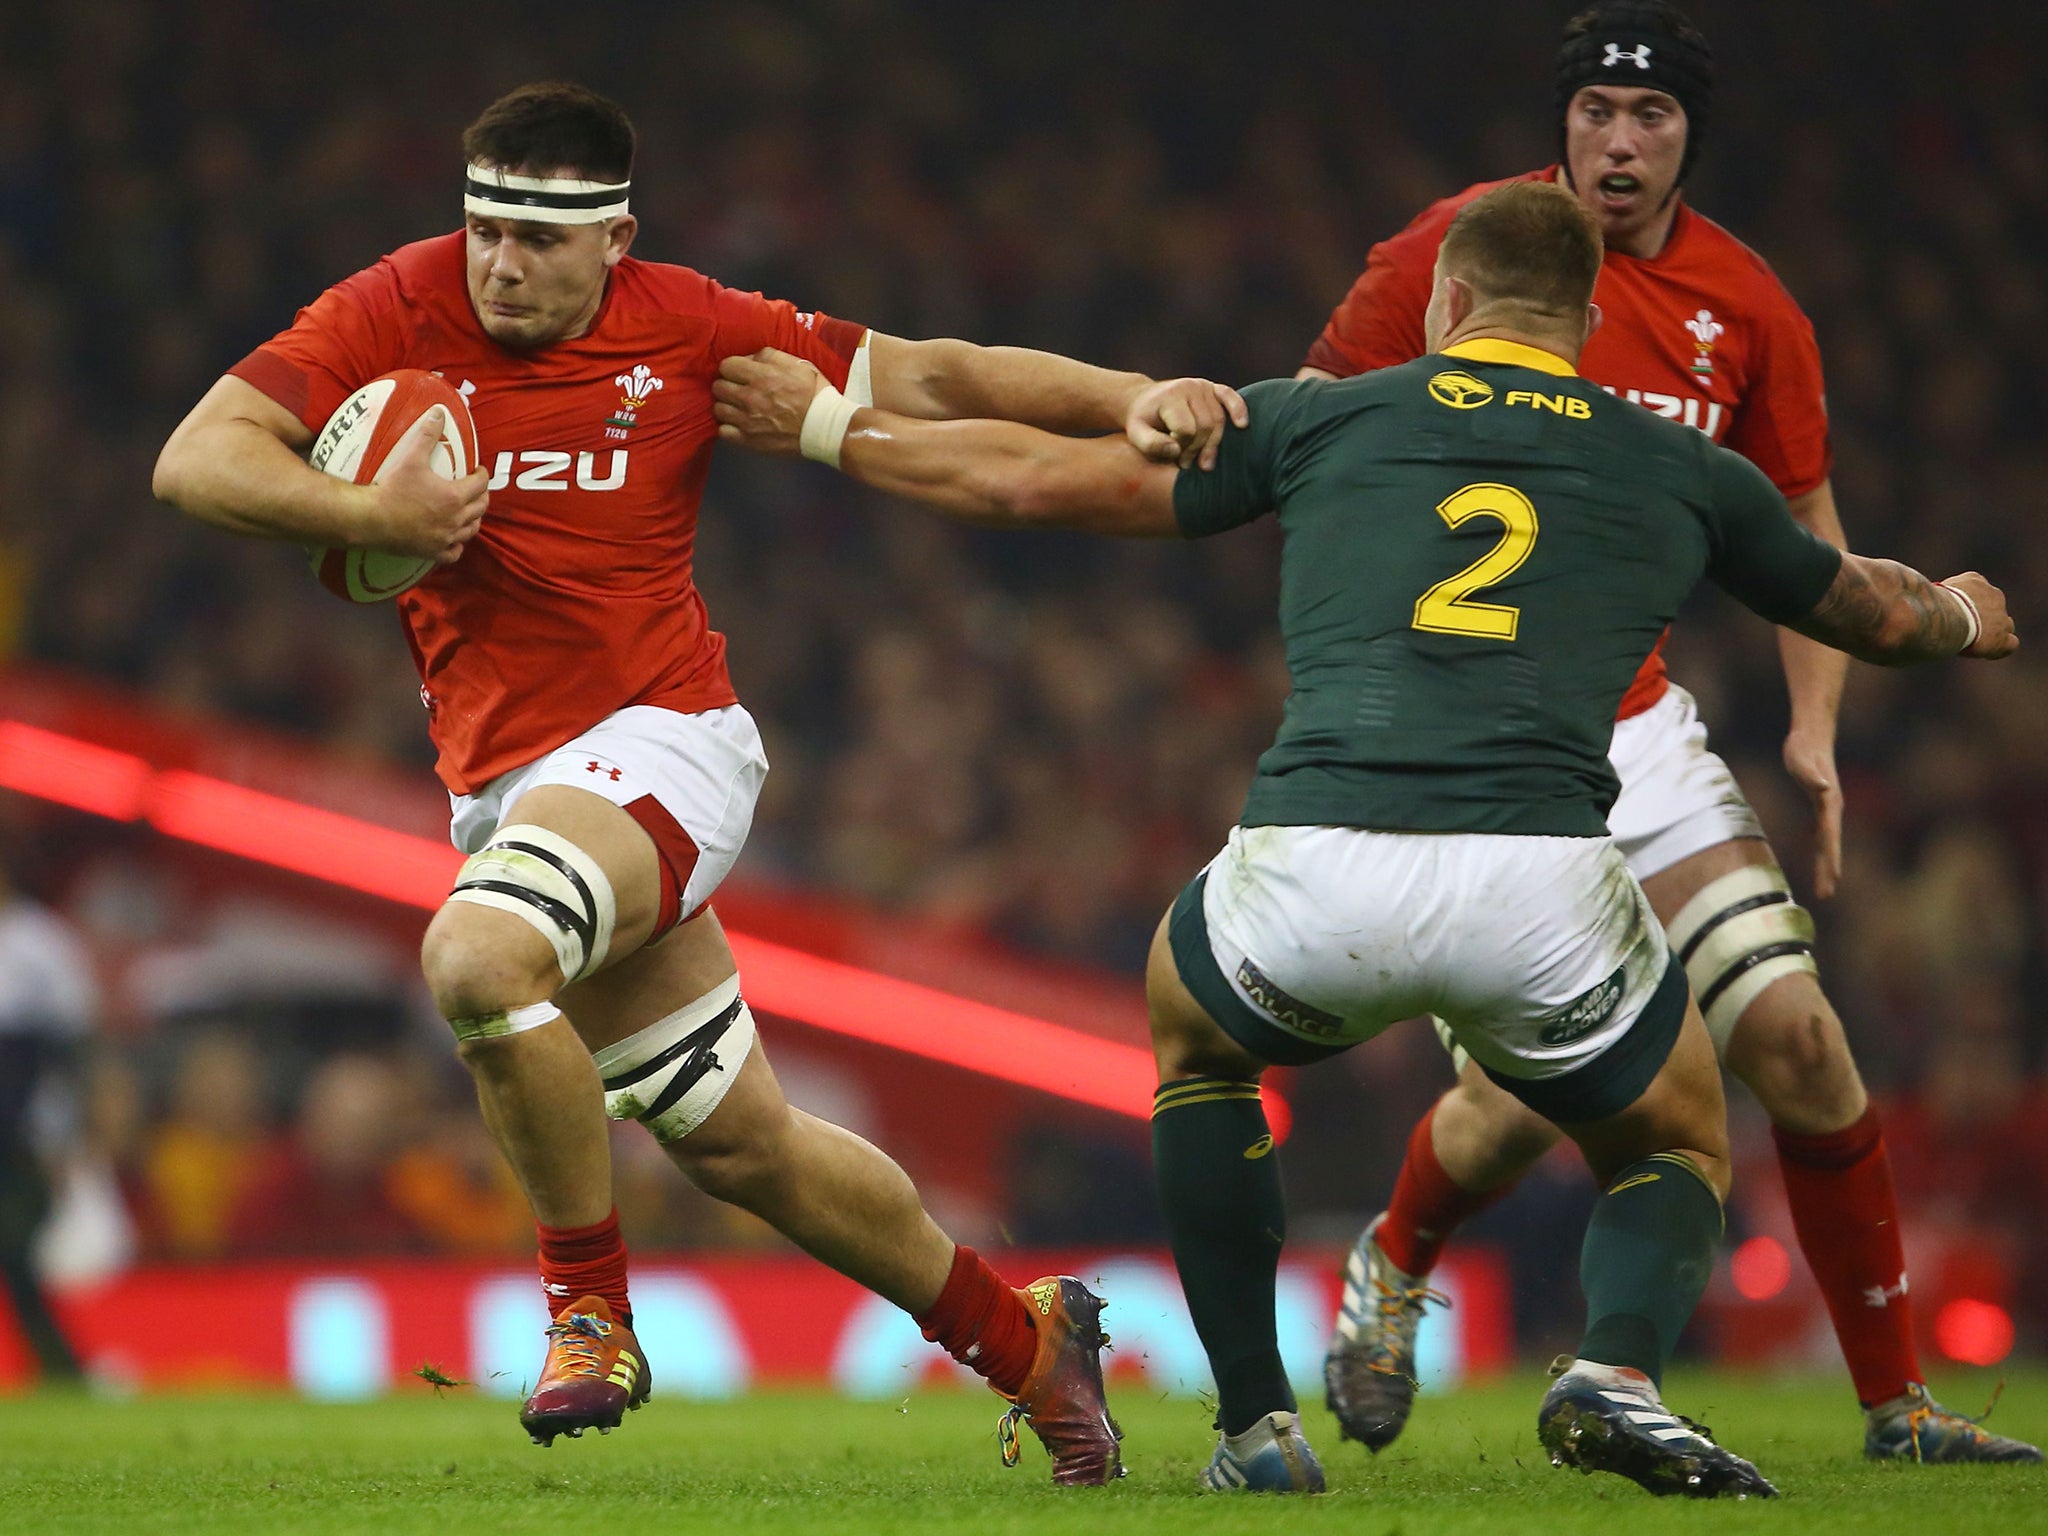 Ellis Jenkins is expected to be named in the Wales squad despite not playing since November